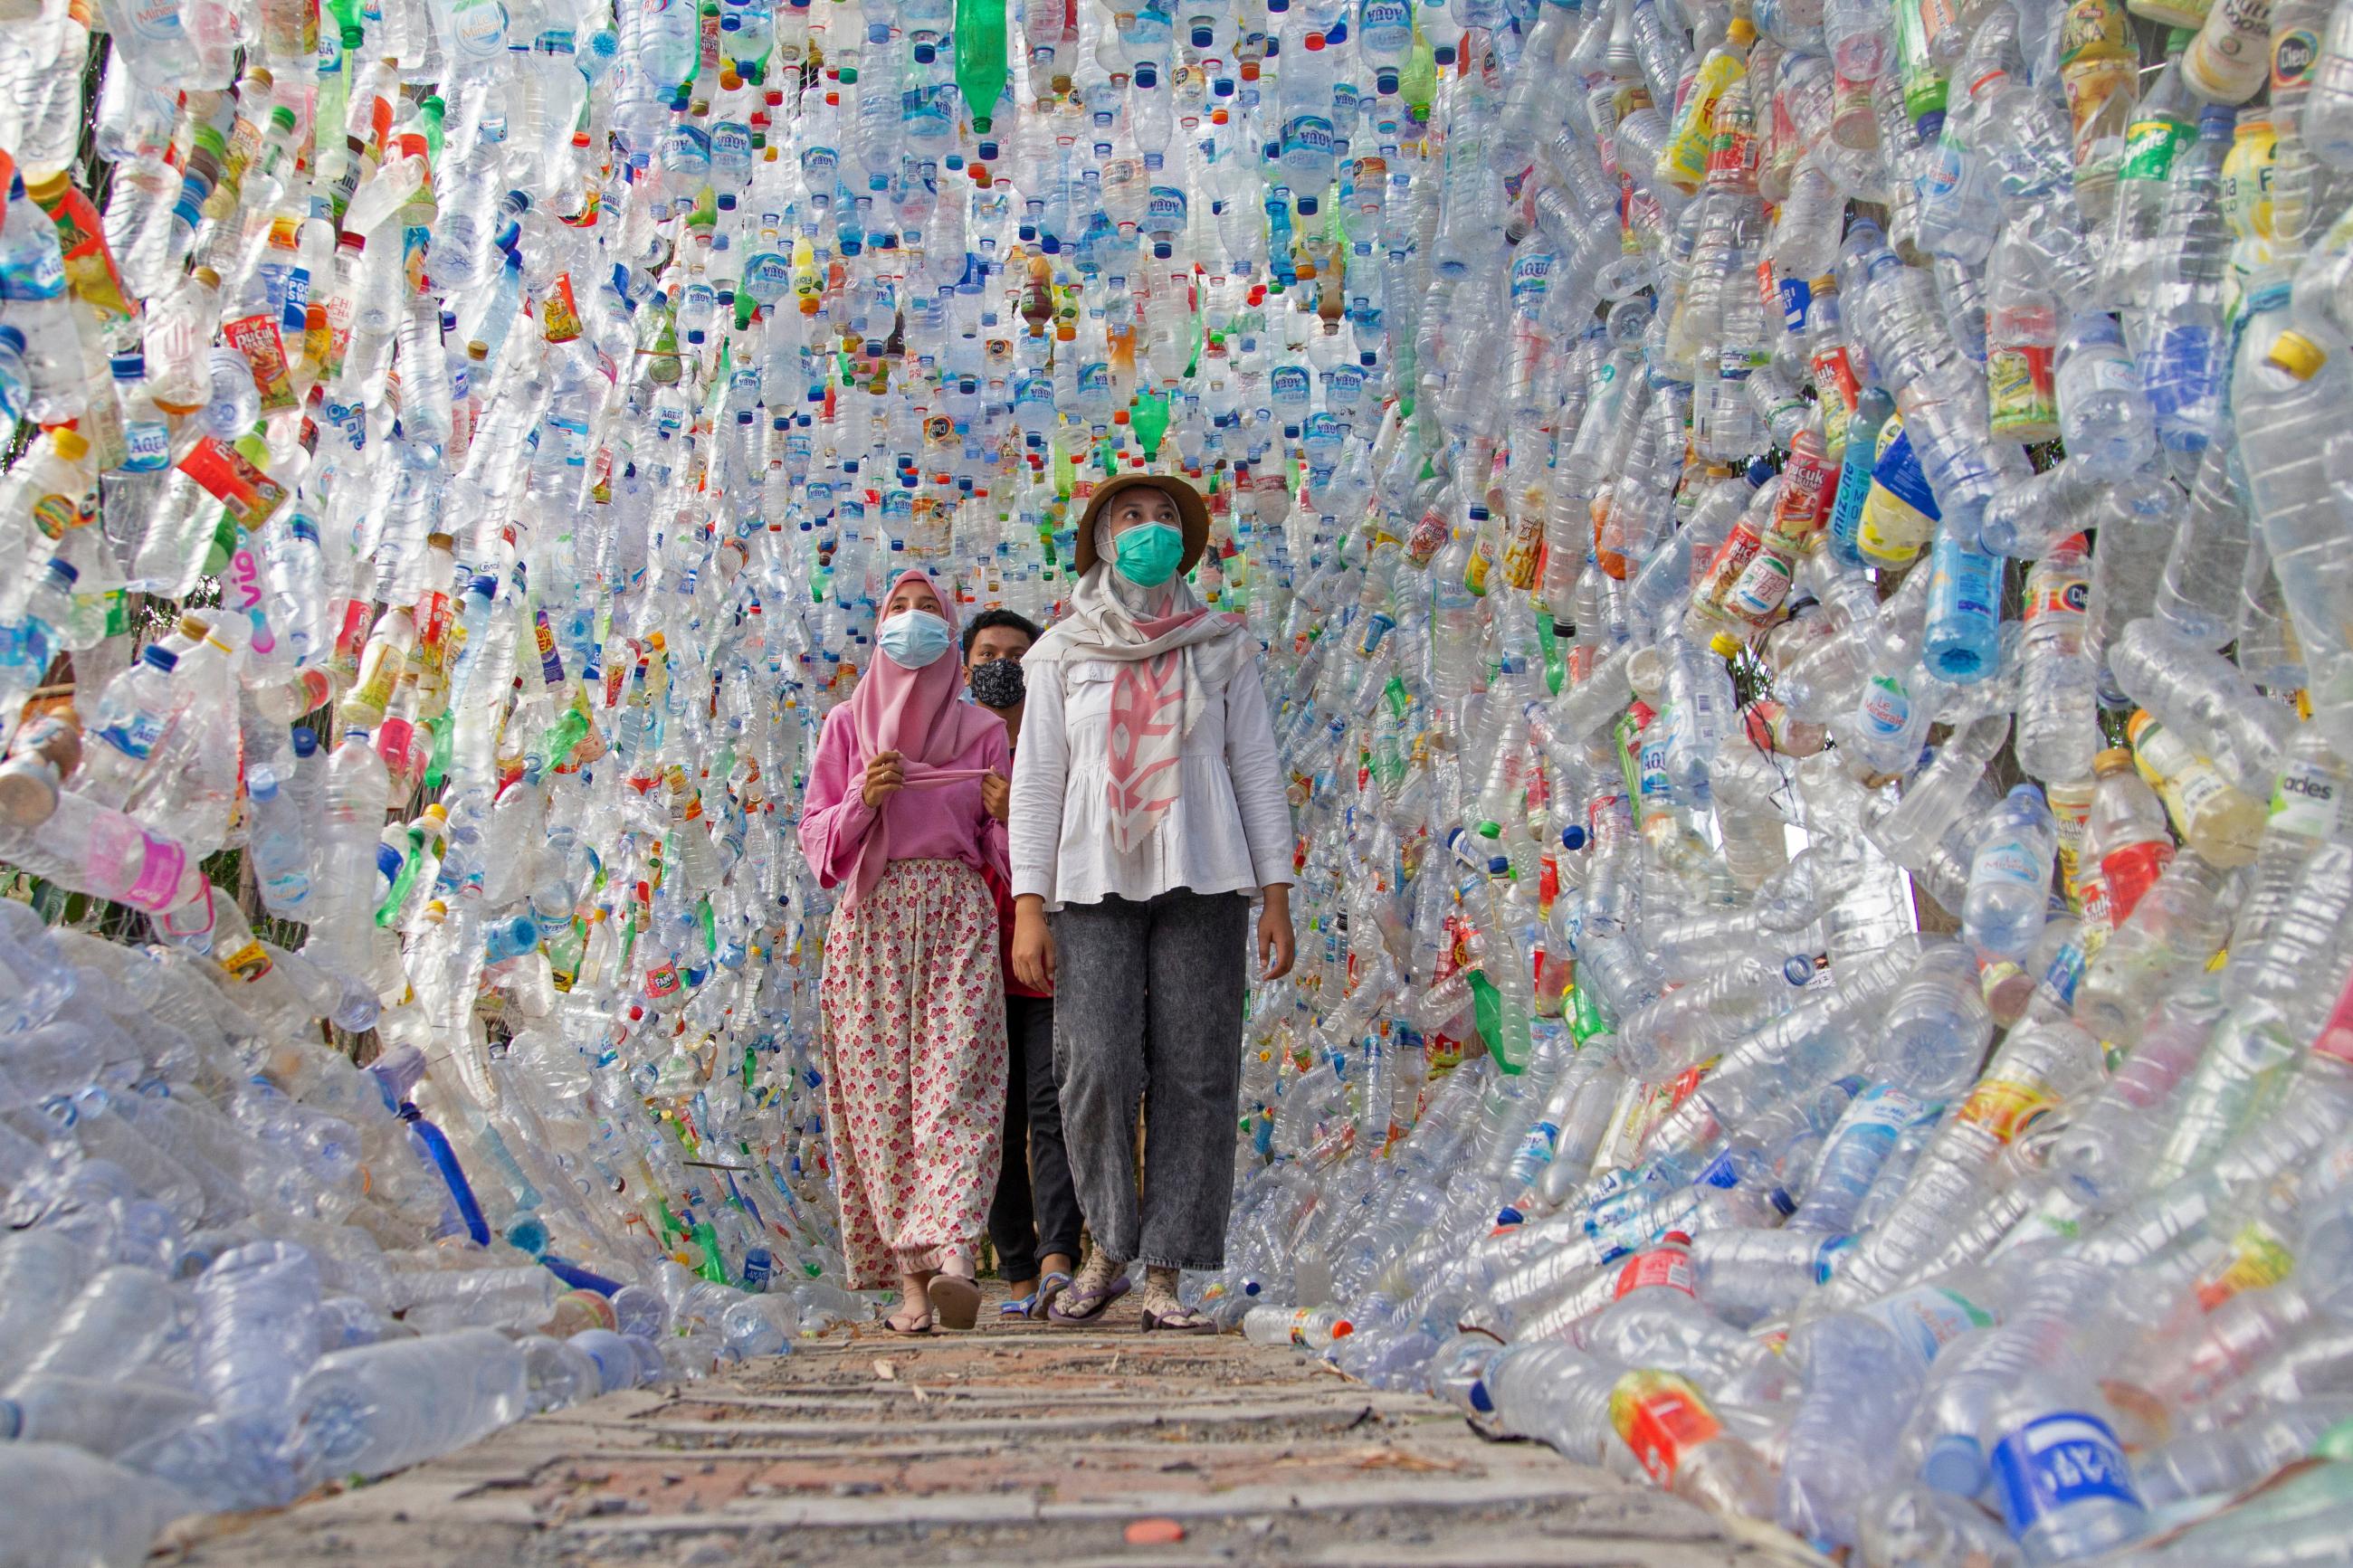 People walk through "Terowongan 4444" or 4444 tunnel, built from plastic bottles collected from several rivers around the city in three years, at the plastic museum constructed by Indonesia's environmental activist group Ecological Observation and Wetlands Conservation (ECOTON) in Gresik regency near Surabaya, East Java province, Indonesia, September 28, 2021.